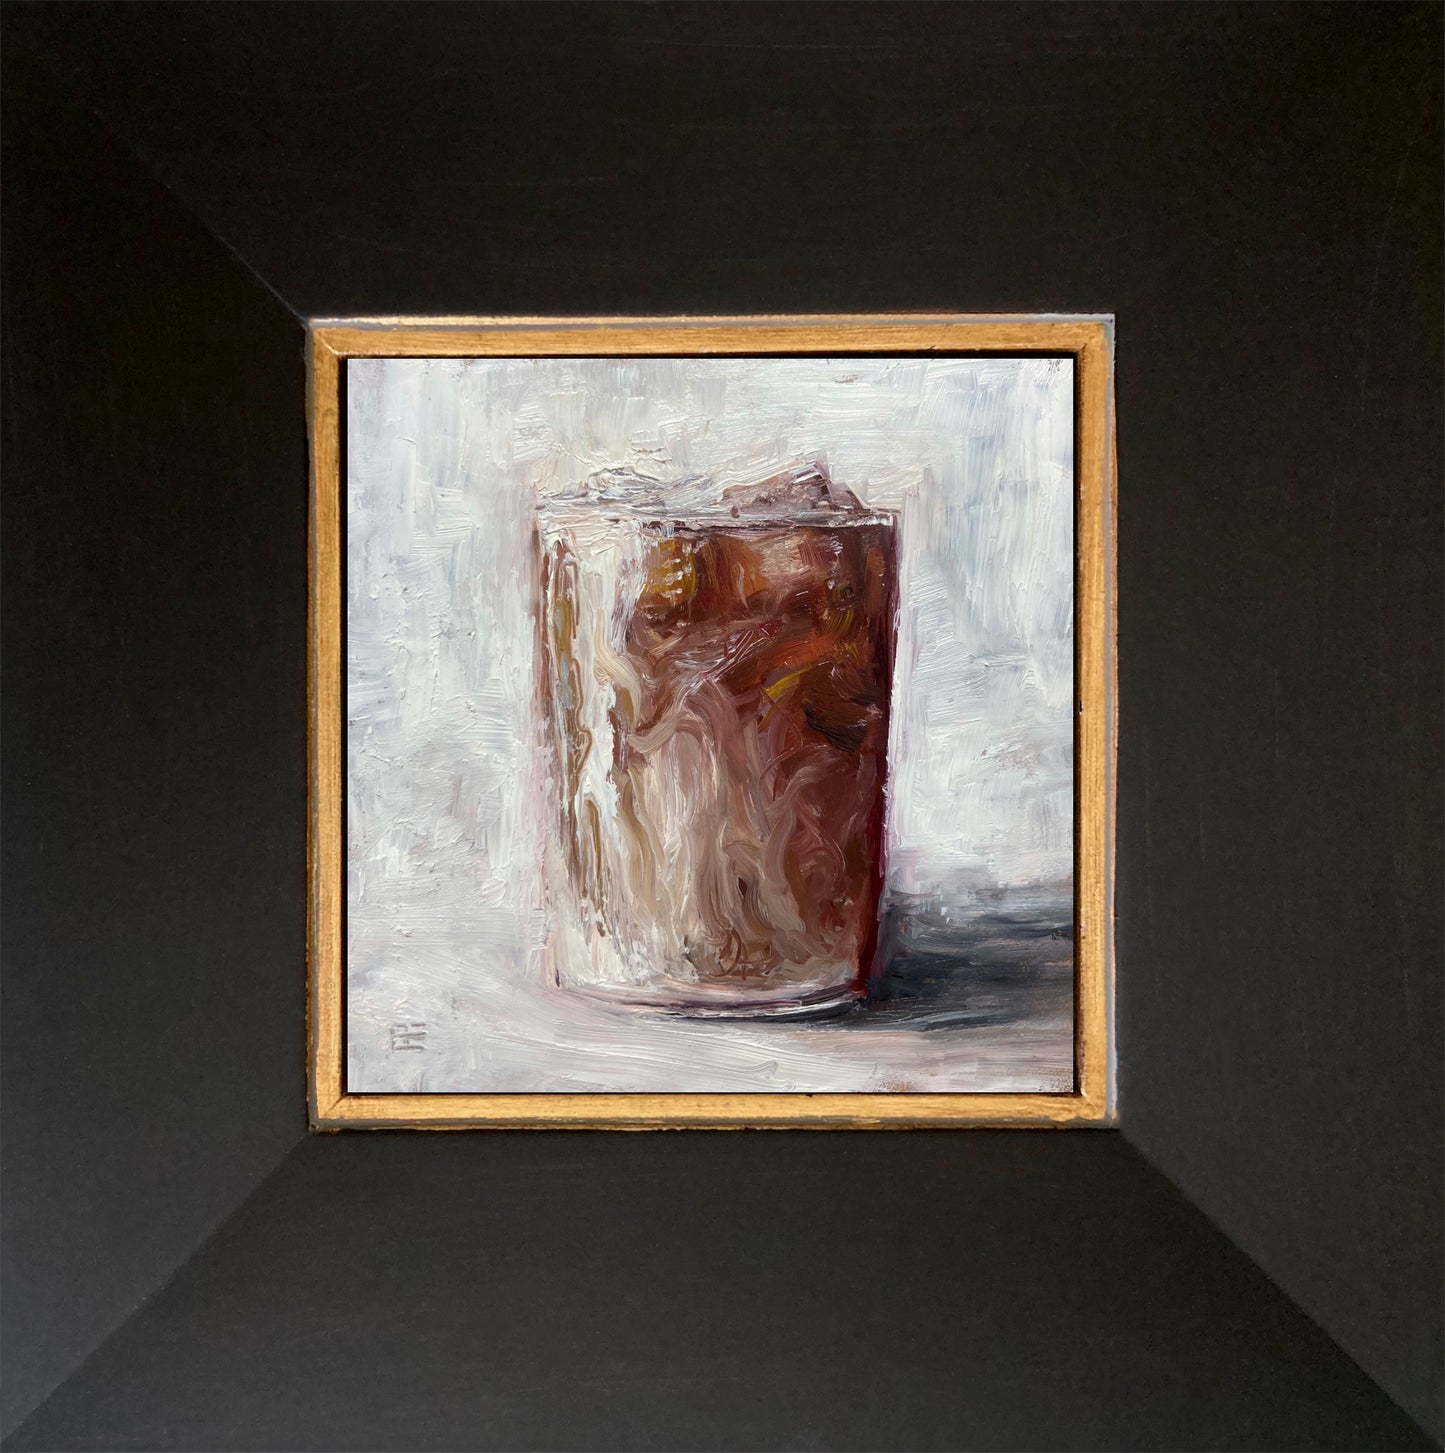 Oil painting of iced Oil painting of iced Oil painting of iced beverage by E. E. Jacks titled Afternoon with dark wood frame